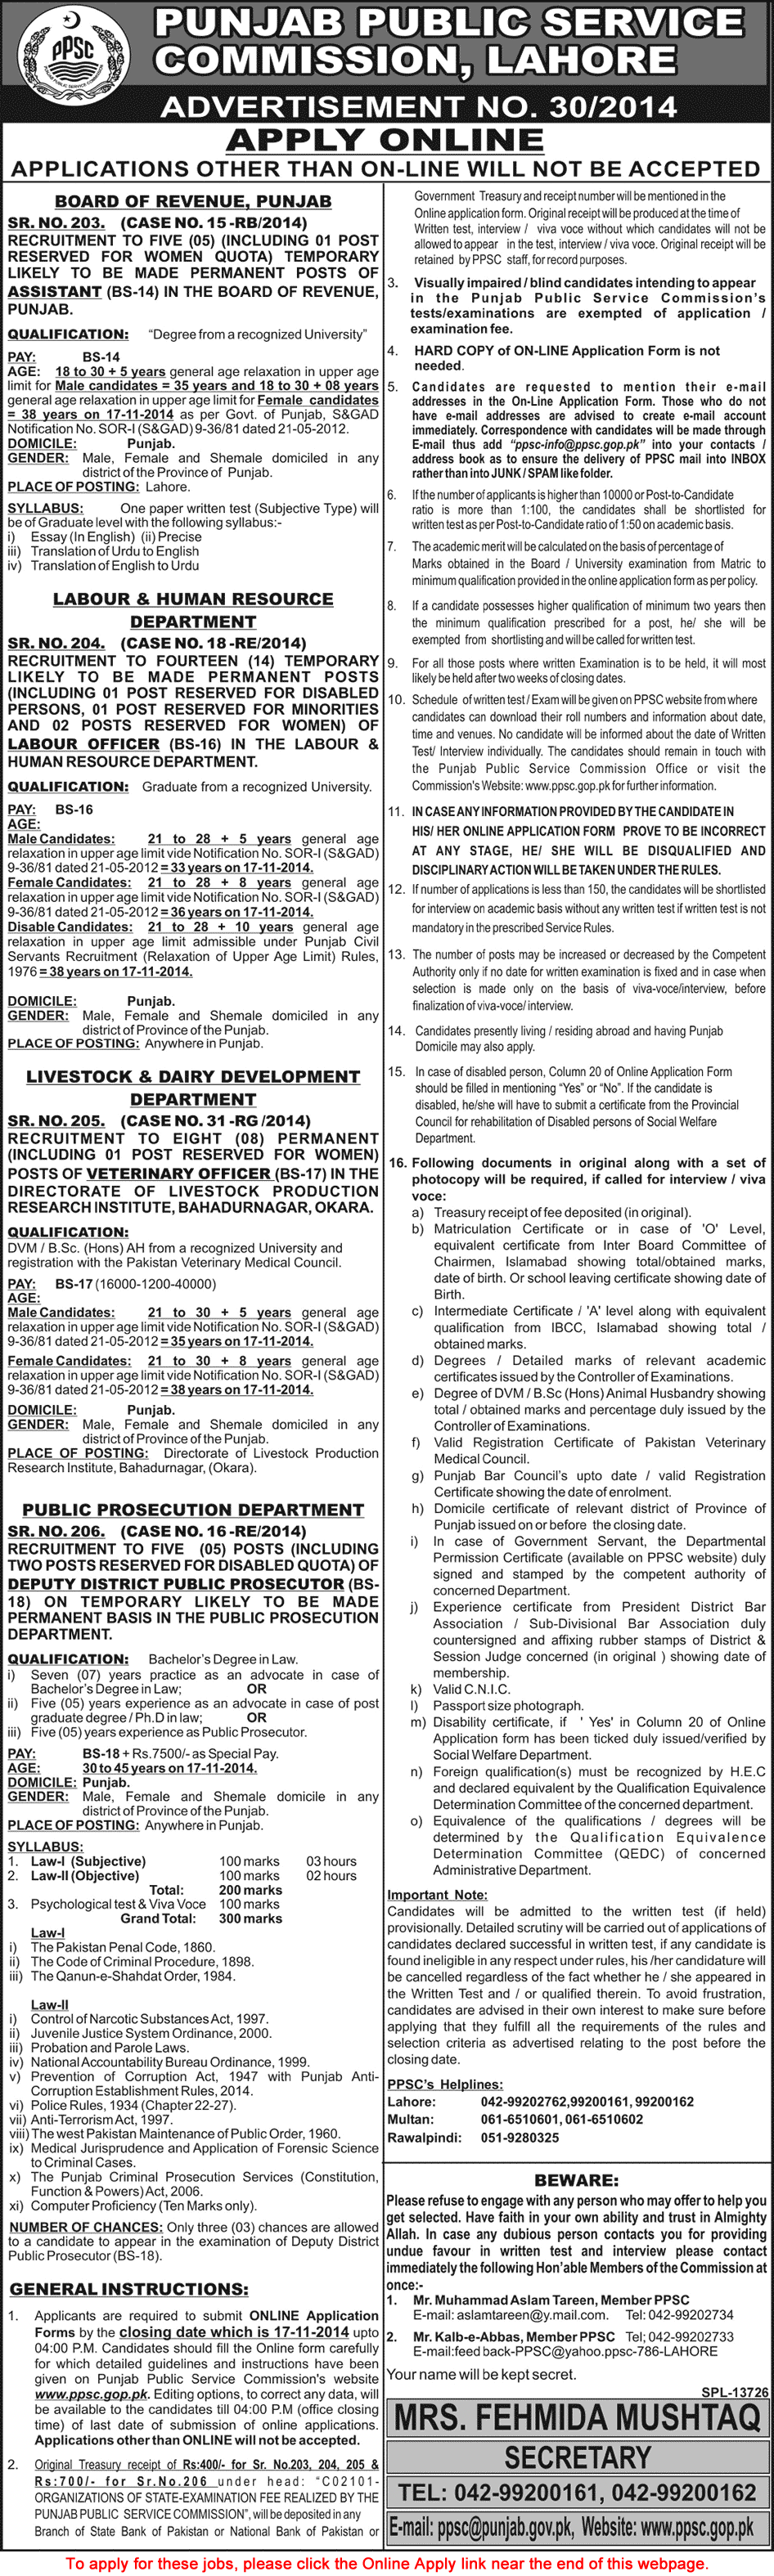 Punjab Public Service Commission Jobs October 2014 Consolidated Advertisement Latest / New